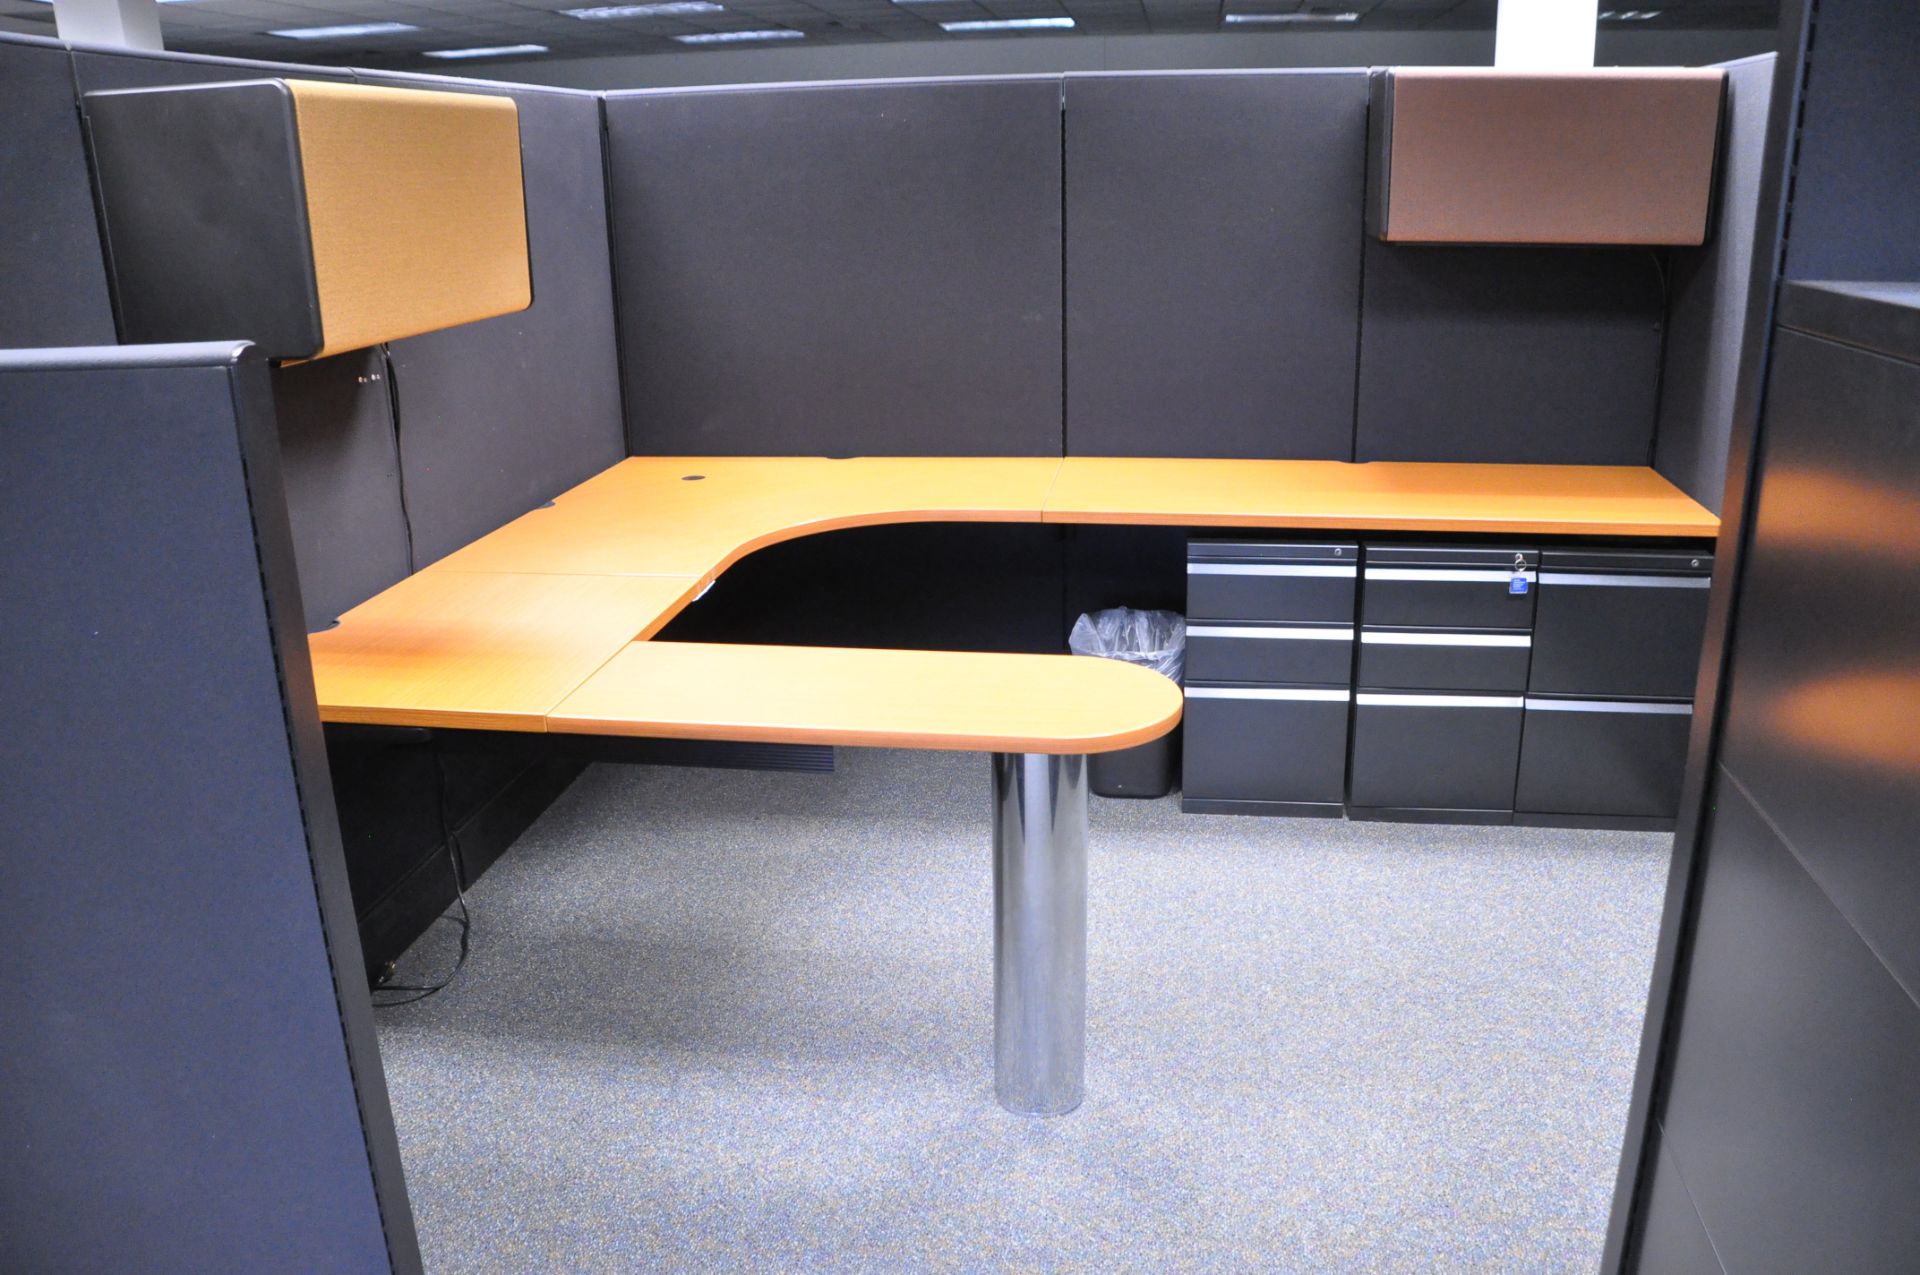 Lot-(1) Herman Miller 6-Station Cubicle Partition Work System with Standing Cabinets and Partition - Image 5 of 10